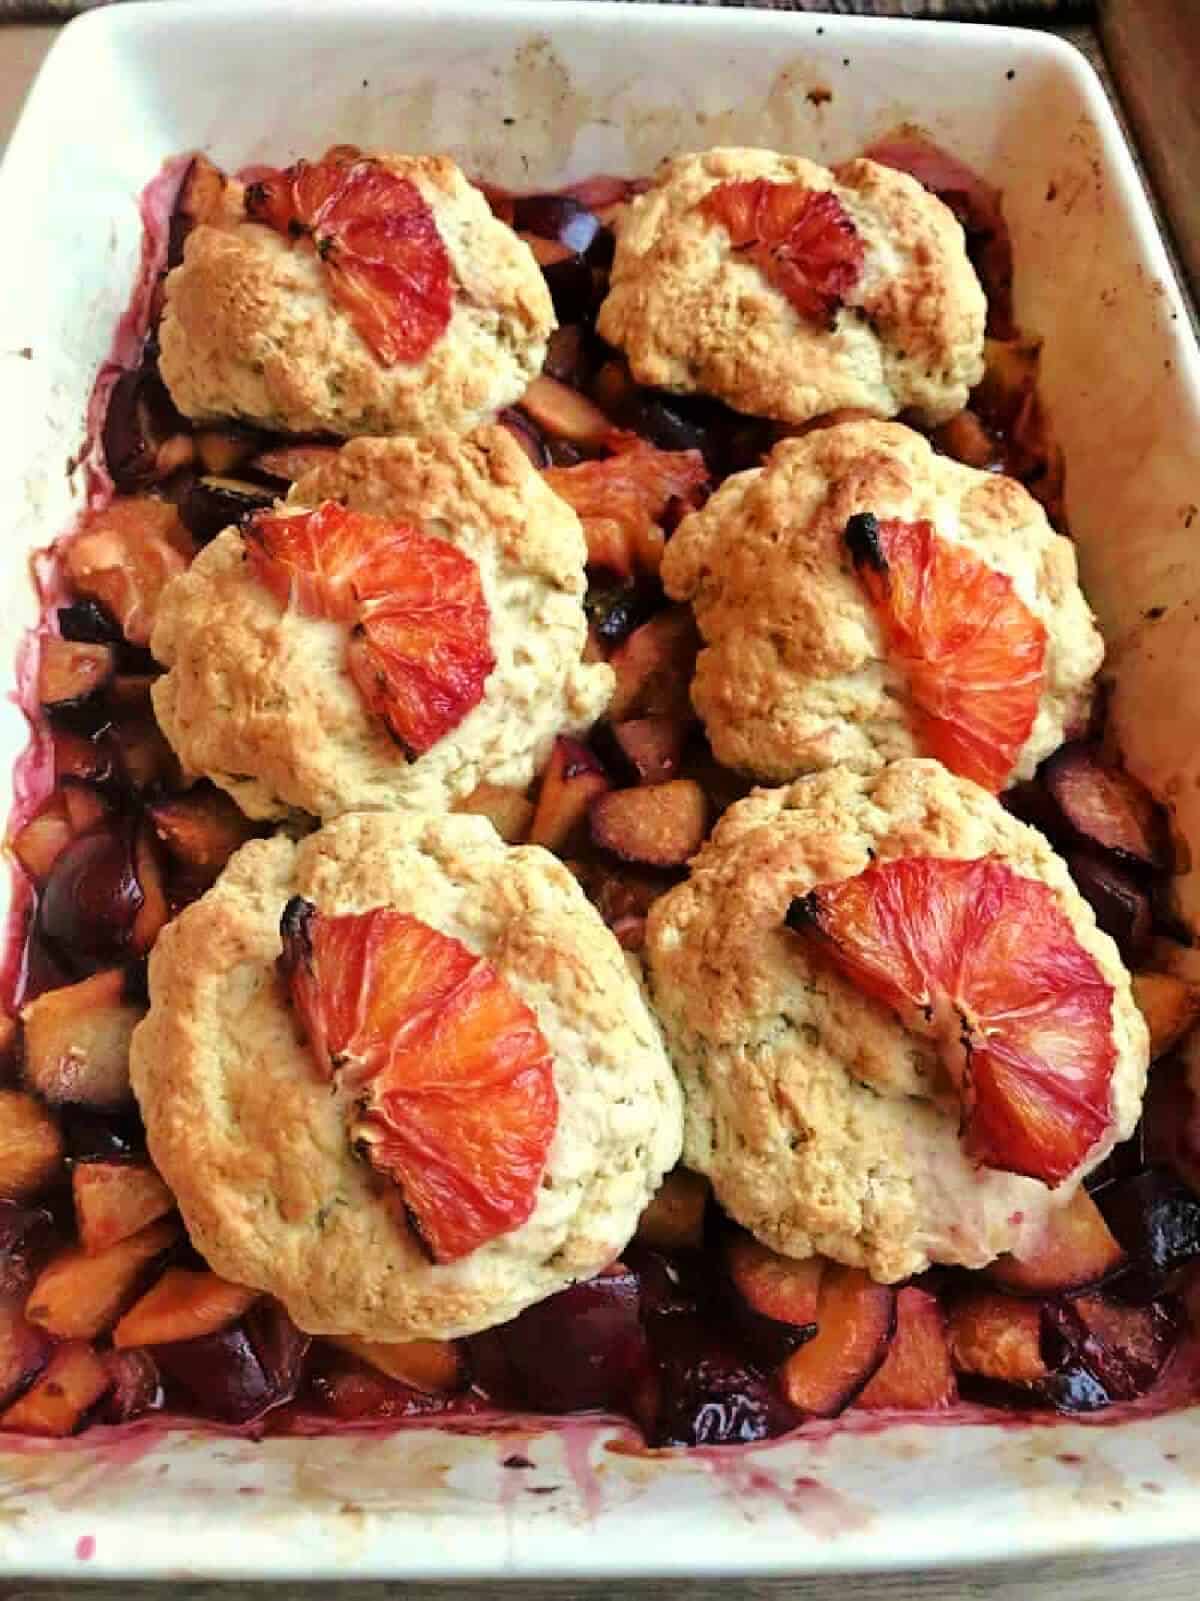 Serving dish with cobbler with scone topping and blood orange slices on top.